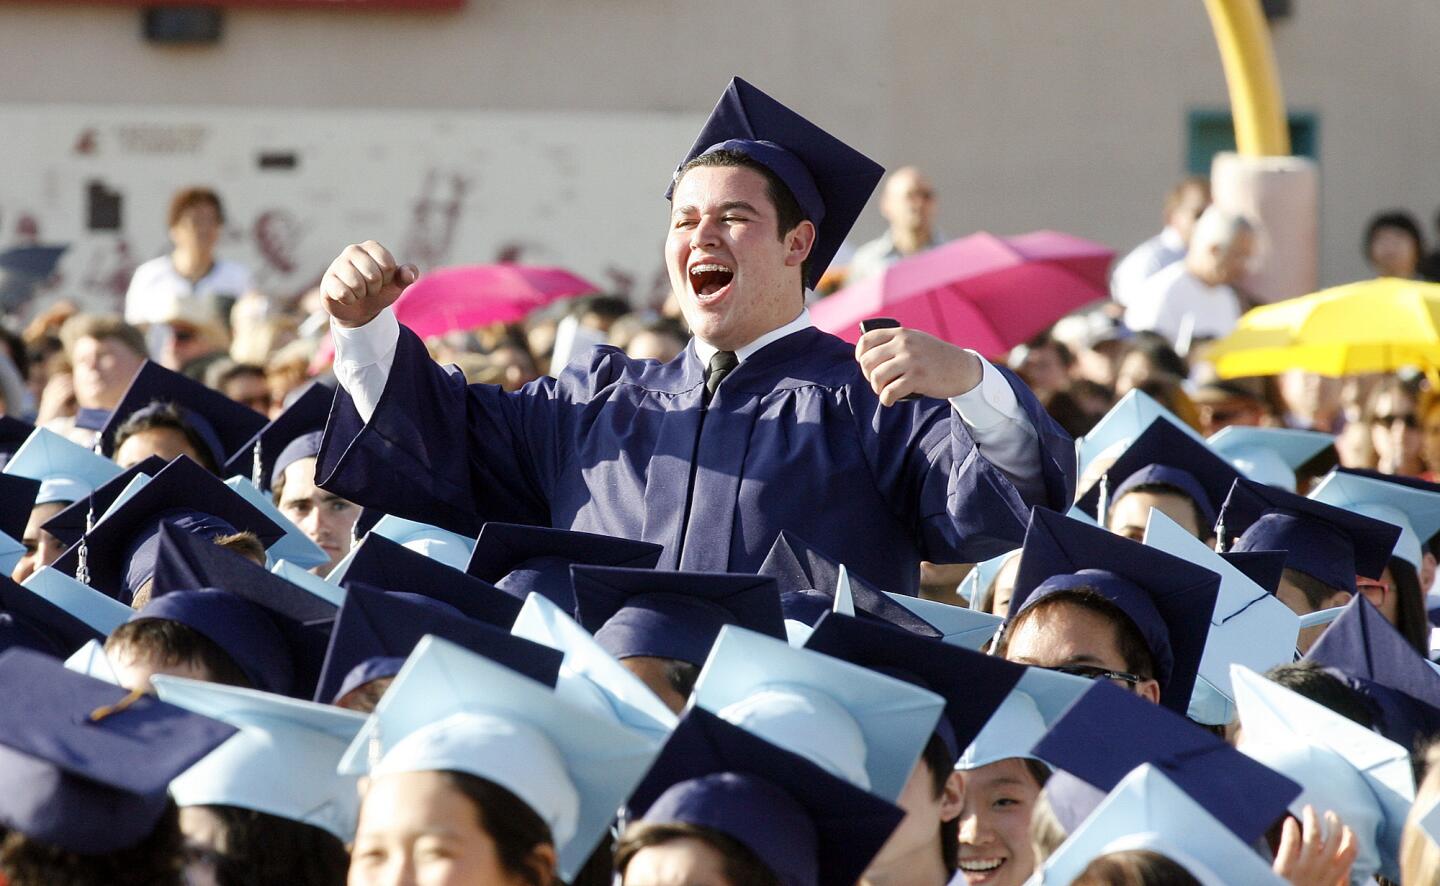 Crescenta Valley High School graduate Masis Ohanesyan cheers as parents are acknowledged at the school's commencement ceremony at Glendale Community College.